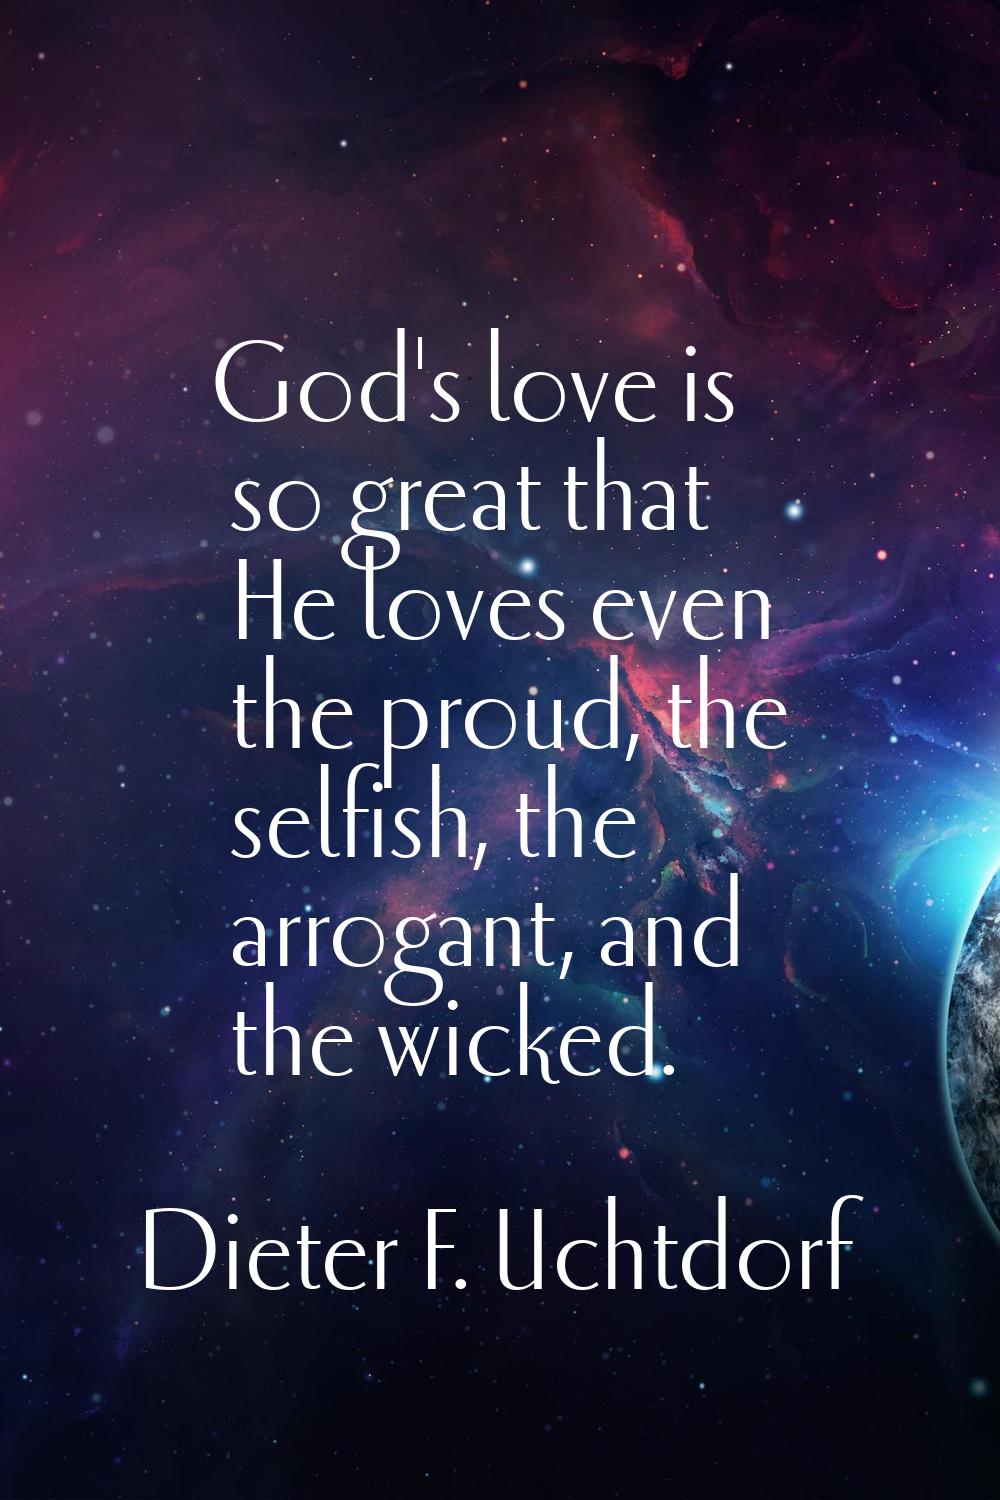 God's love is so great that He loves even the proud, the selfish, the arrogant, and the wicked.